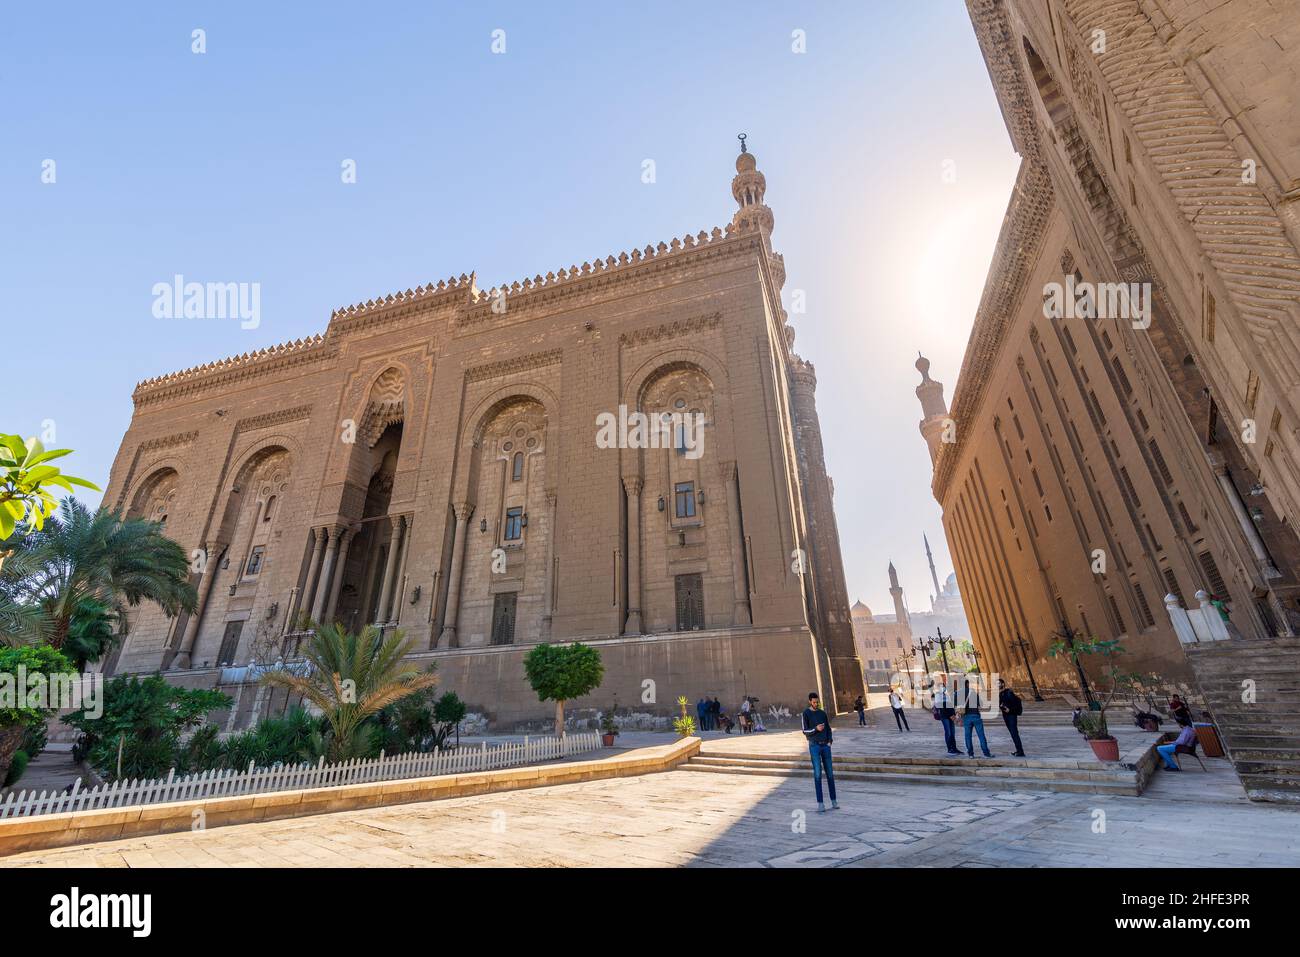 Cairo, Egypt - November 27 2021: Facade of Islamic Royal era Mosque of Al Rifai, with side view of Mamluk era Mosque and Madrassa of Sultan Hassan, with few visitors, Old Cairo Stock Photo